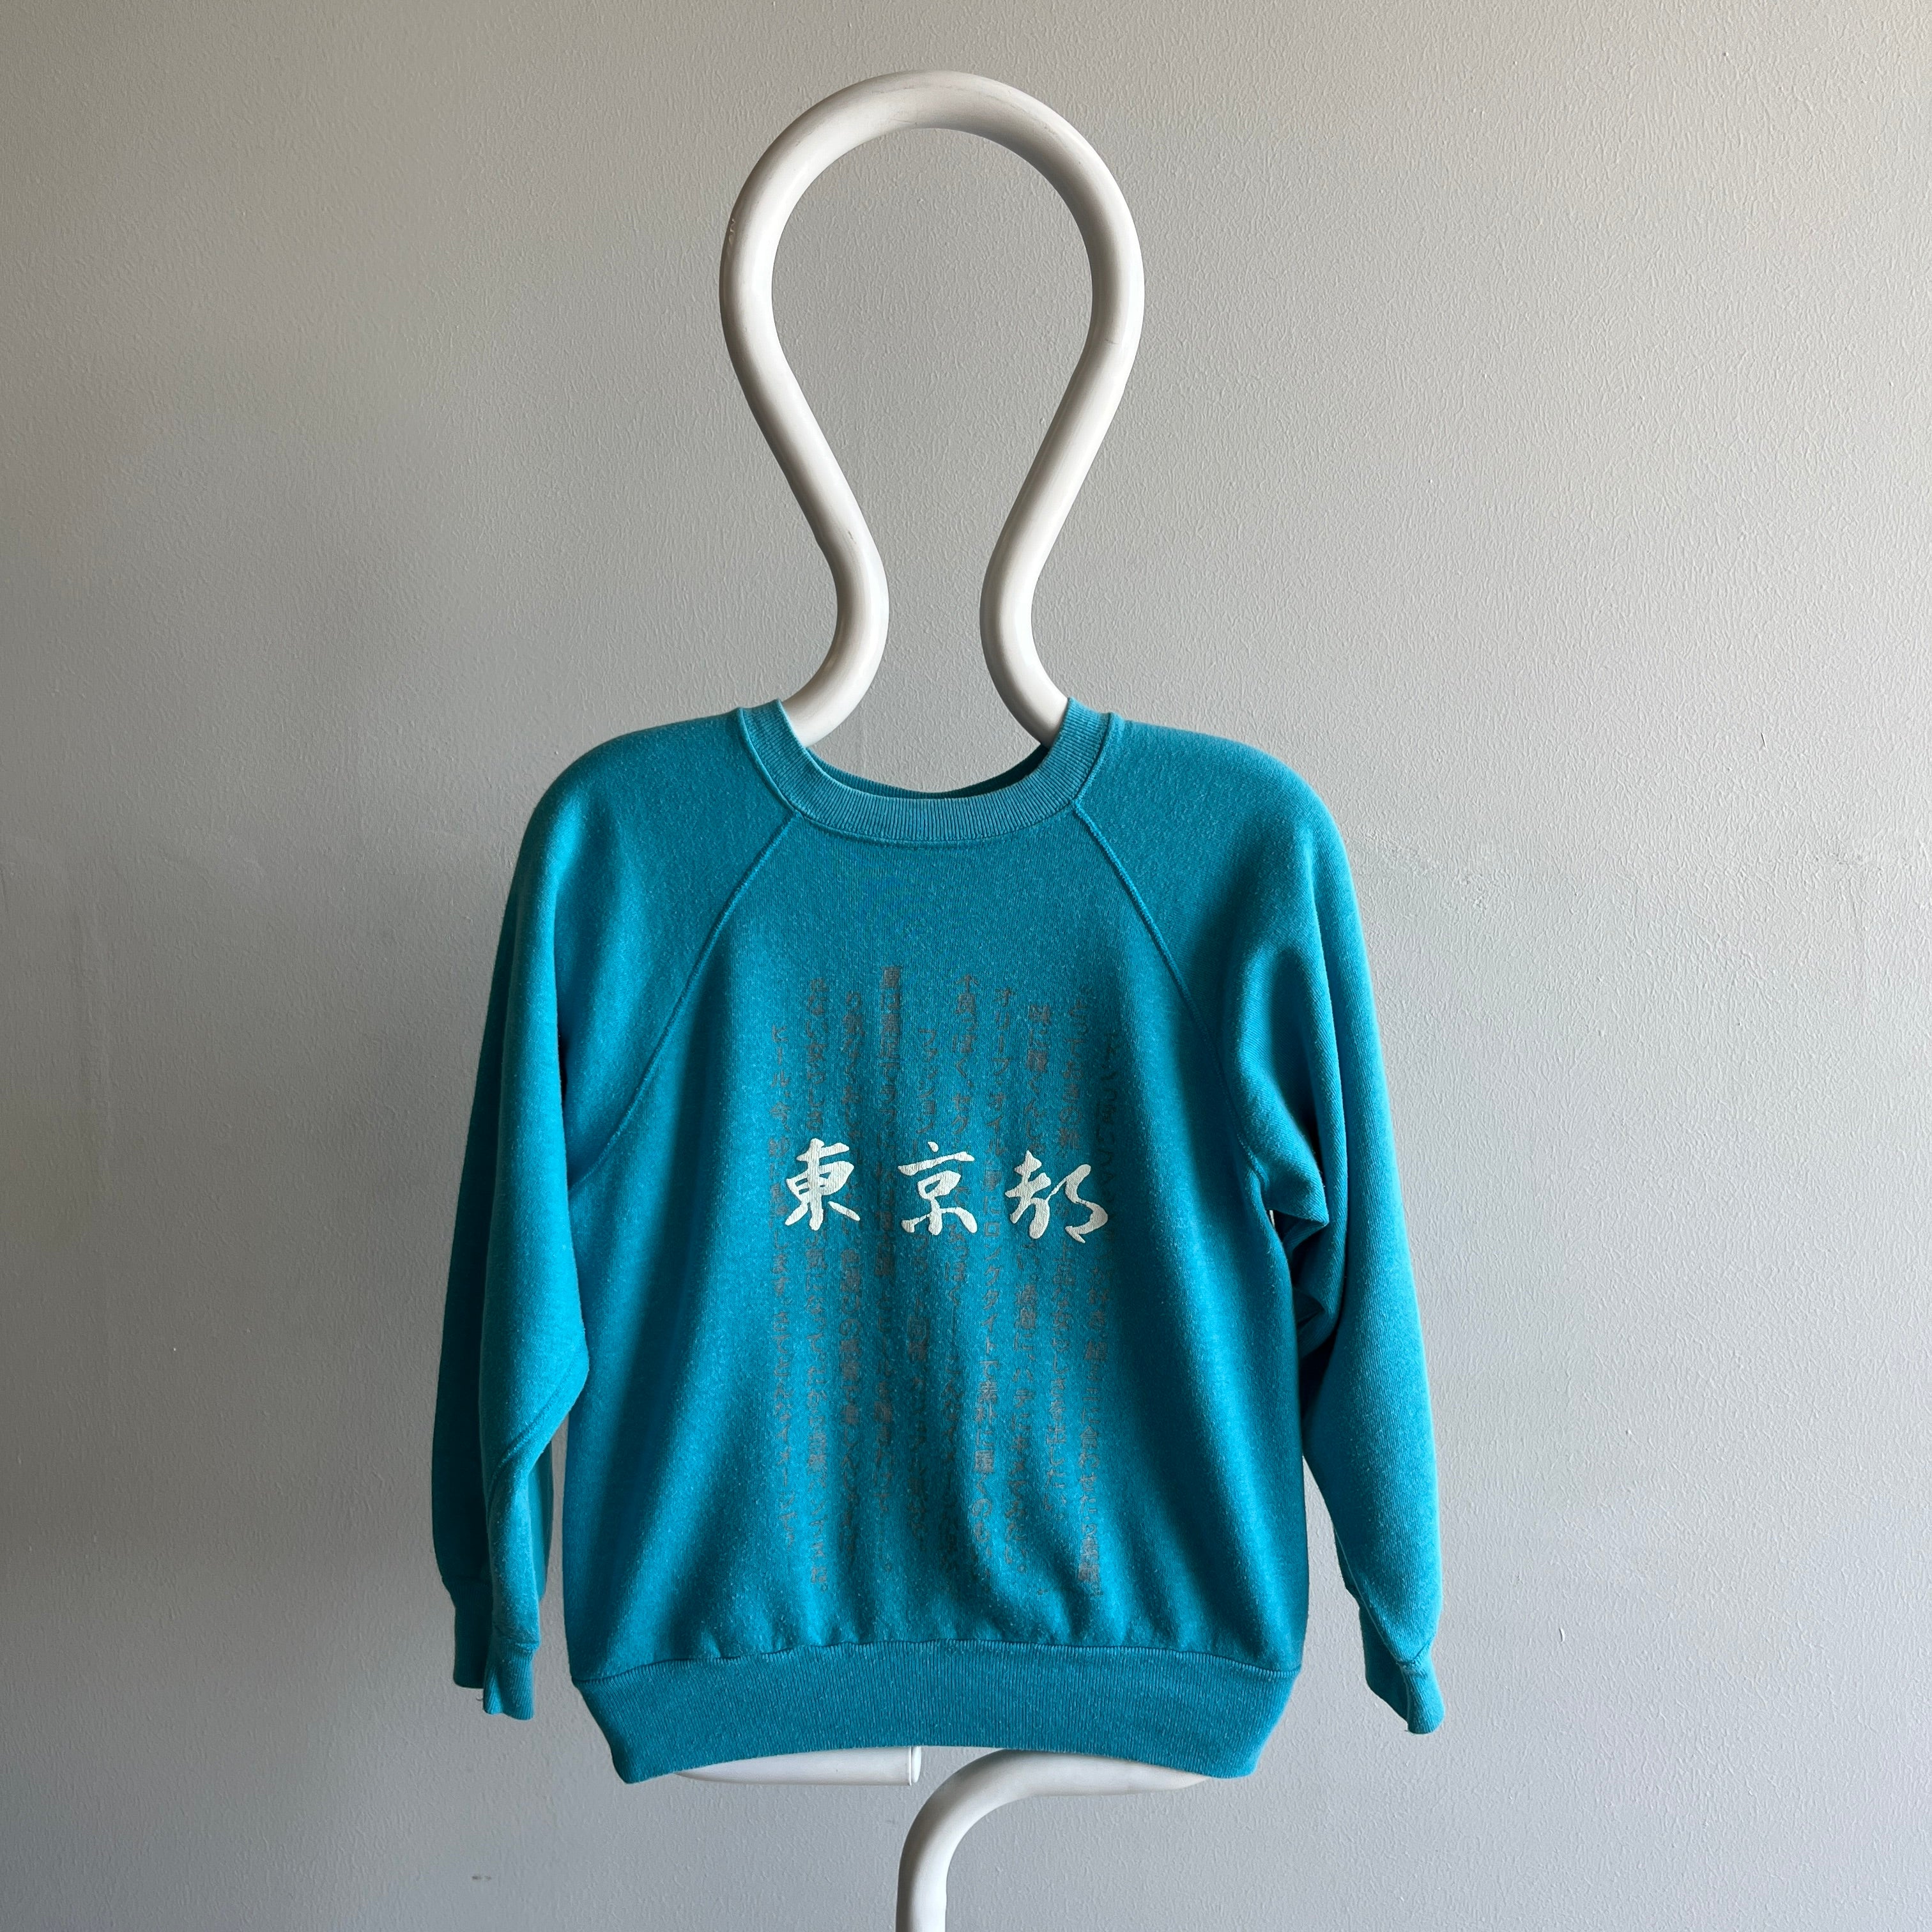 1980s Chinese Character Sweatshirt with Sharpie on The Backside